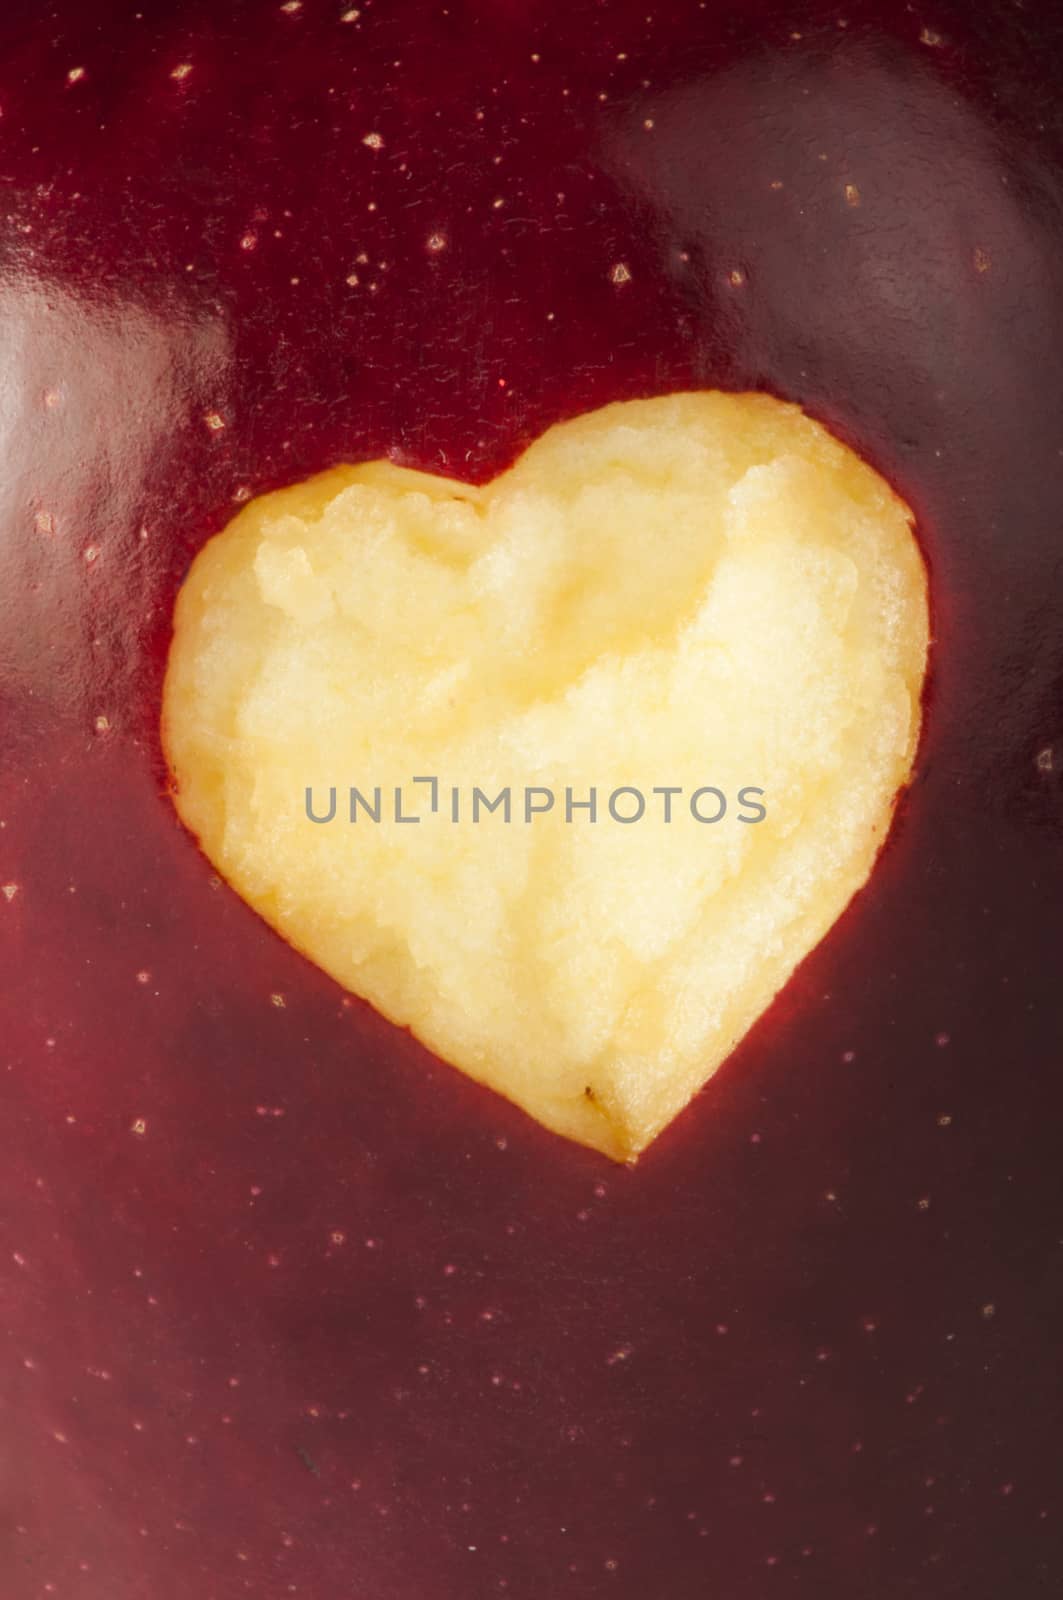 Heart shape closeup carved in red apple